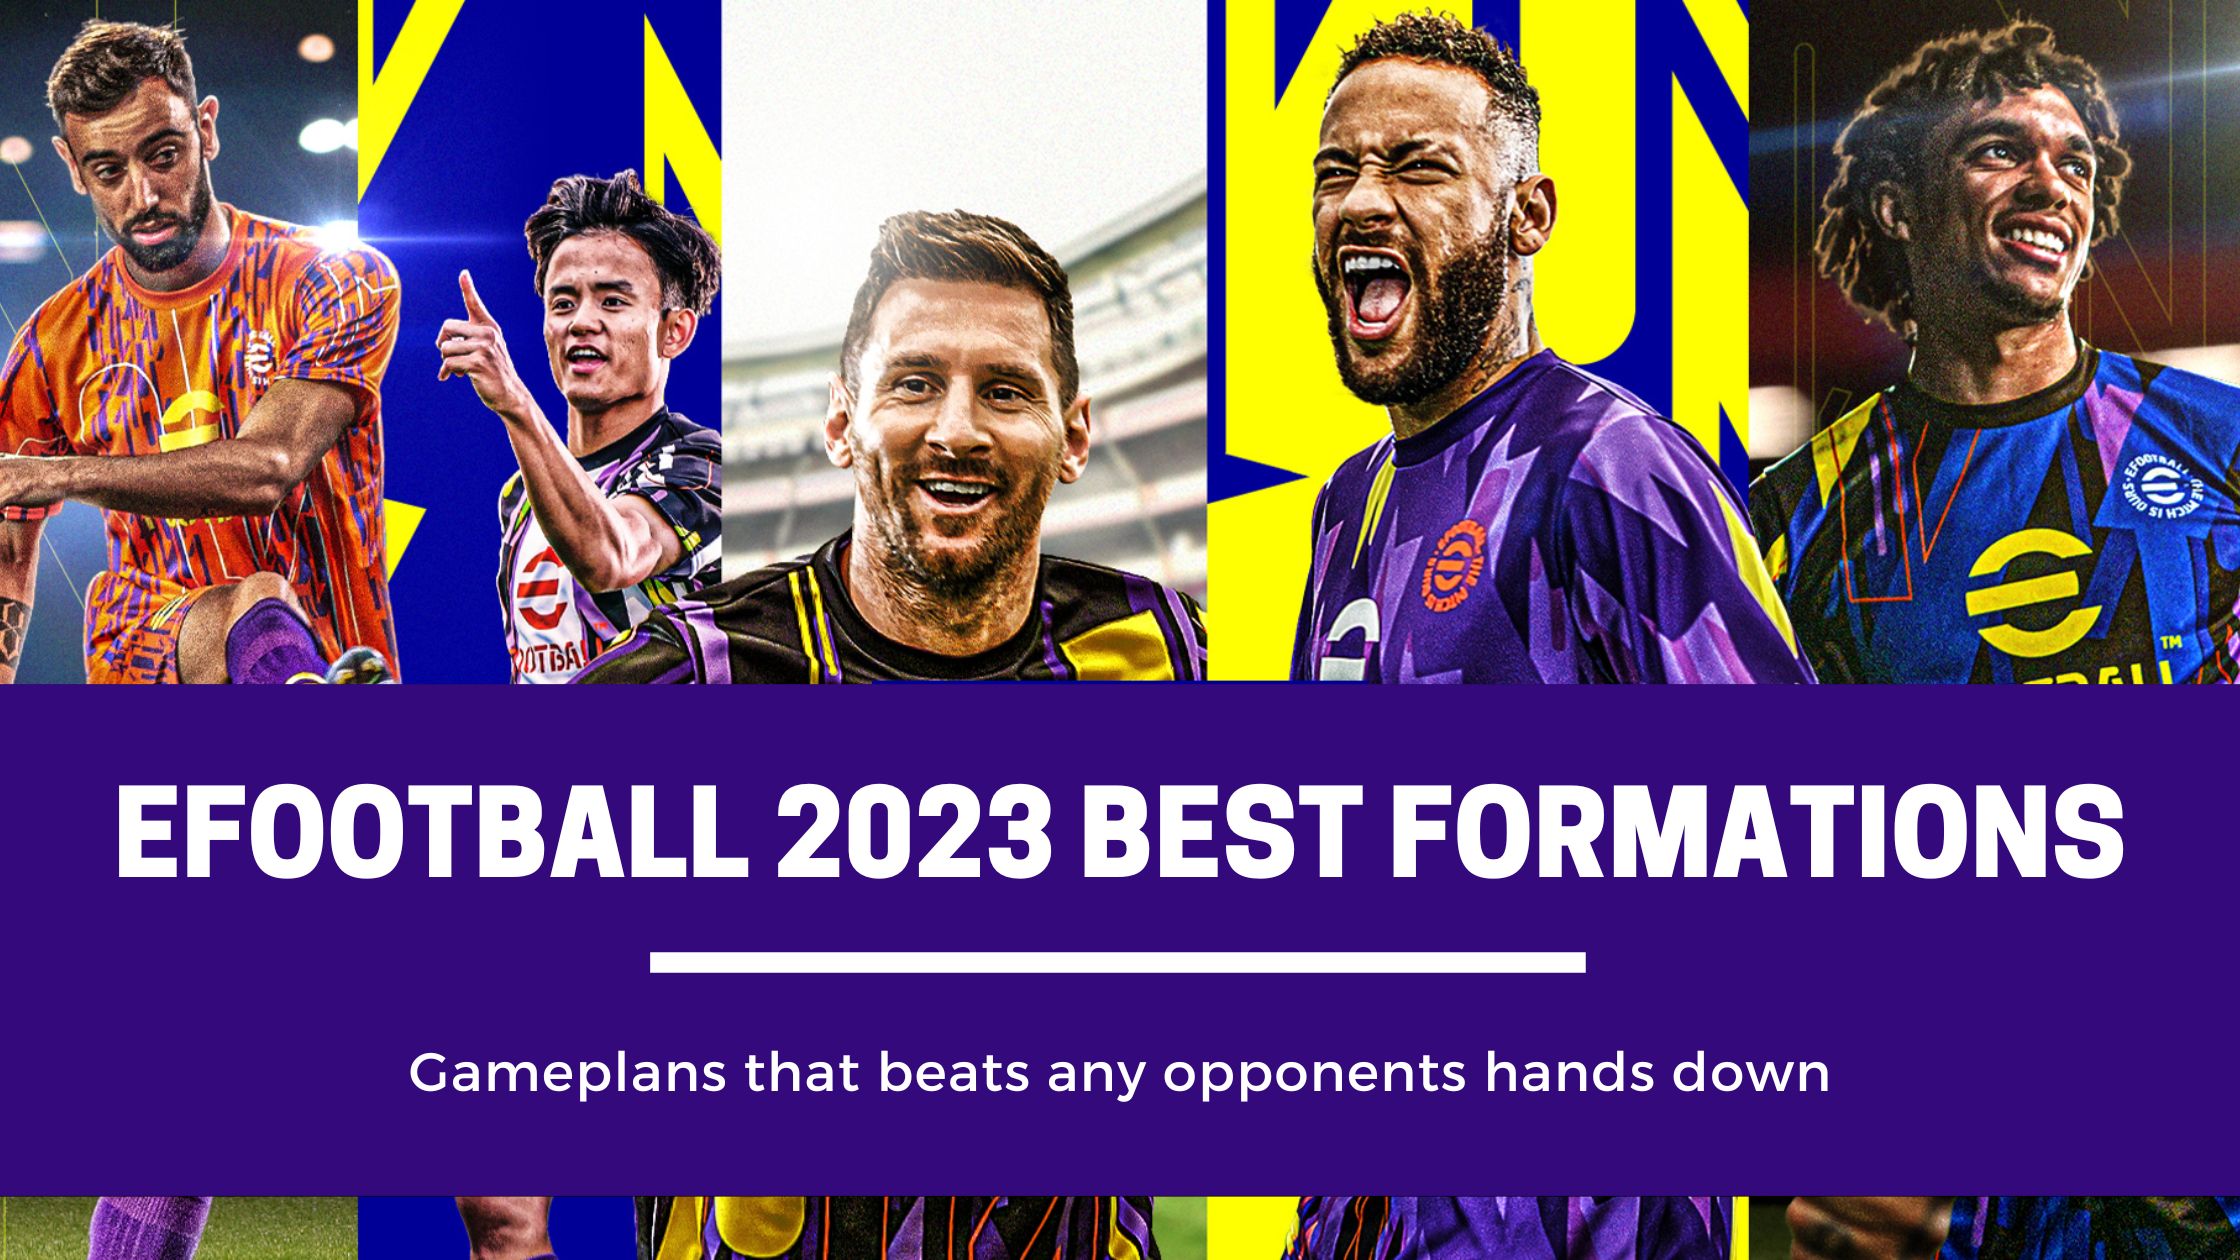 Best formations in eFootball 2023 game